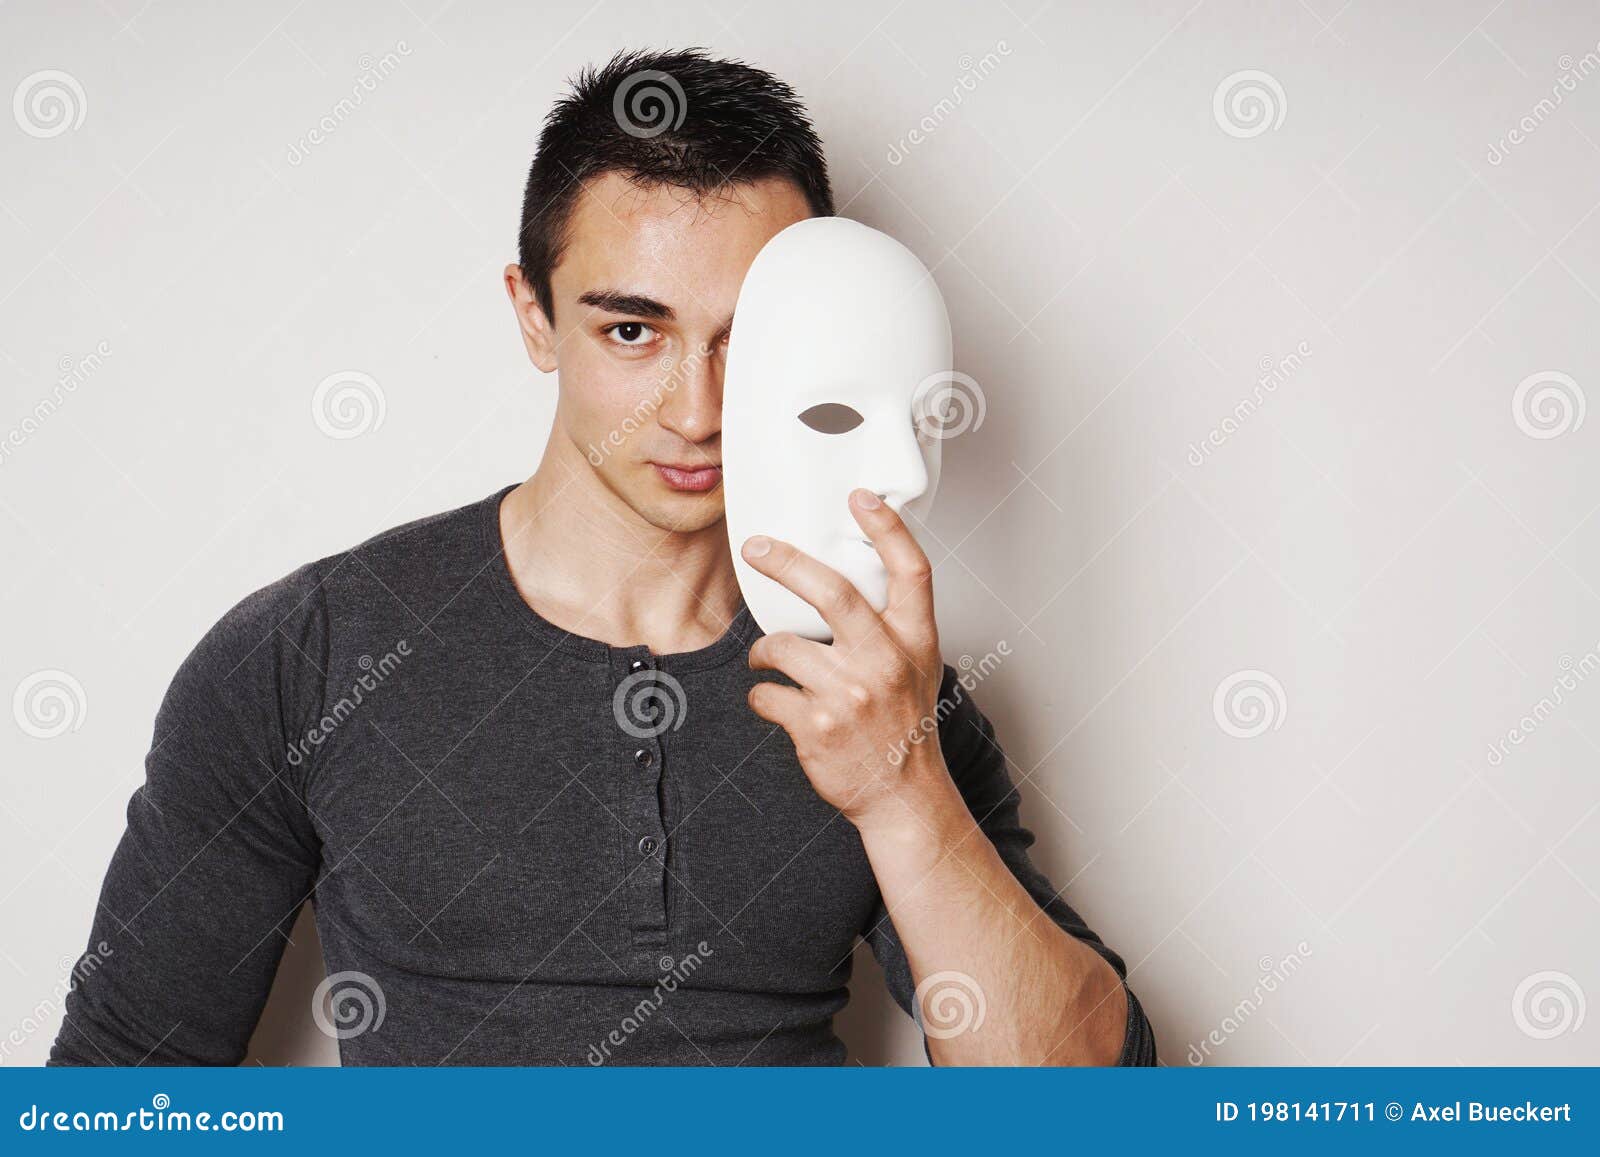 Young Man Taking Off White Mask Revealing Face and Identity Stock